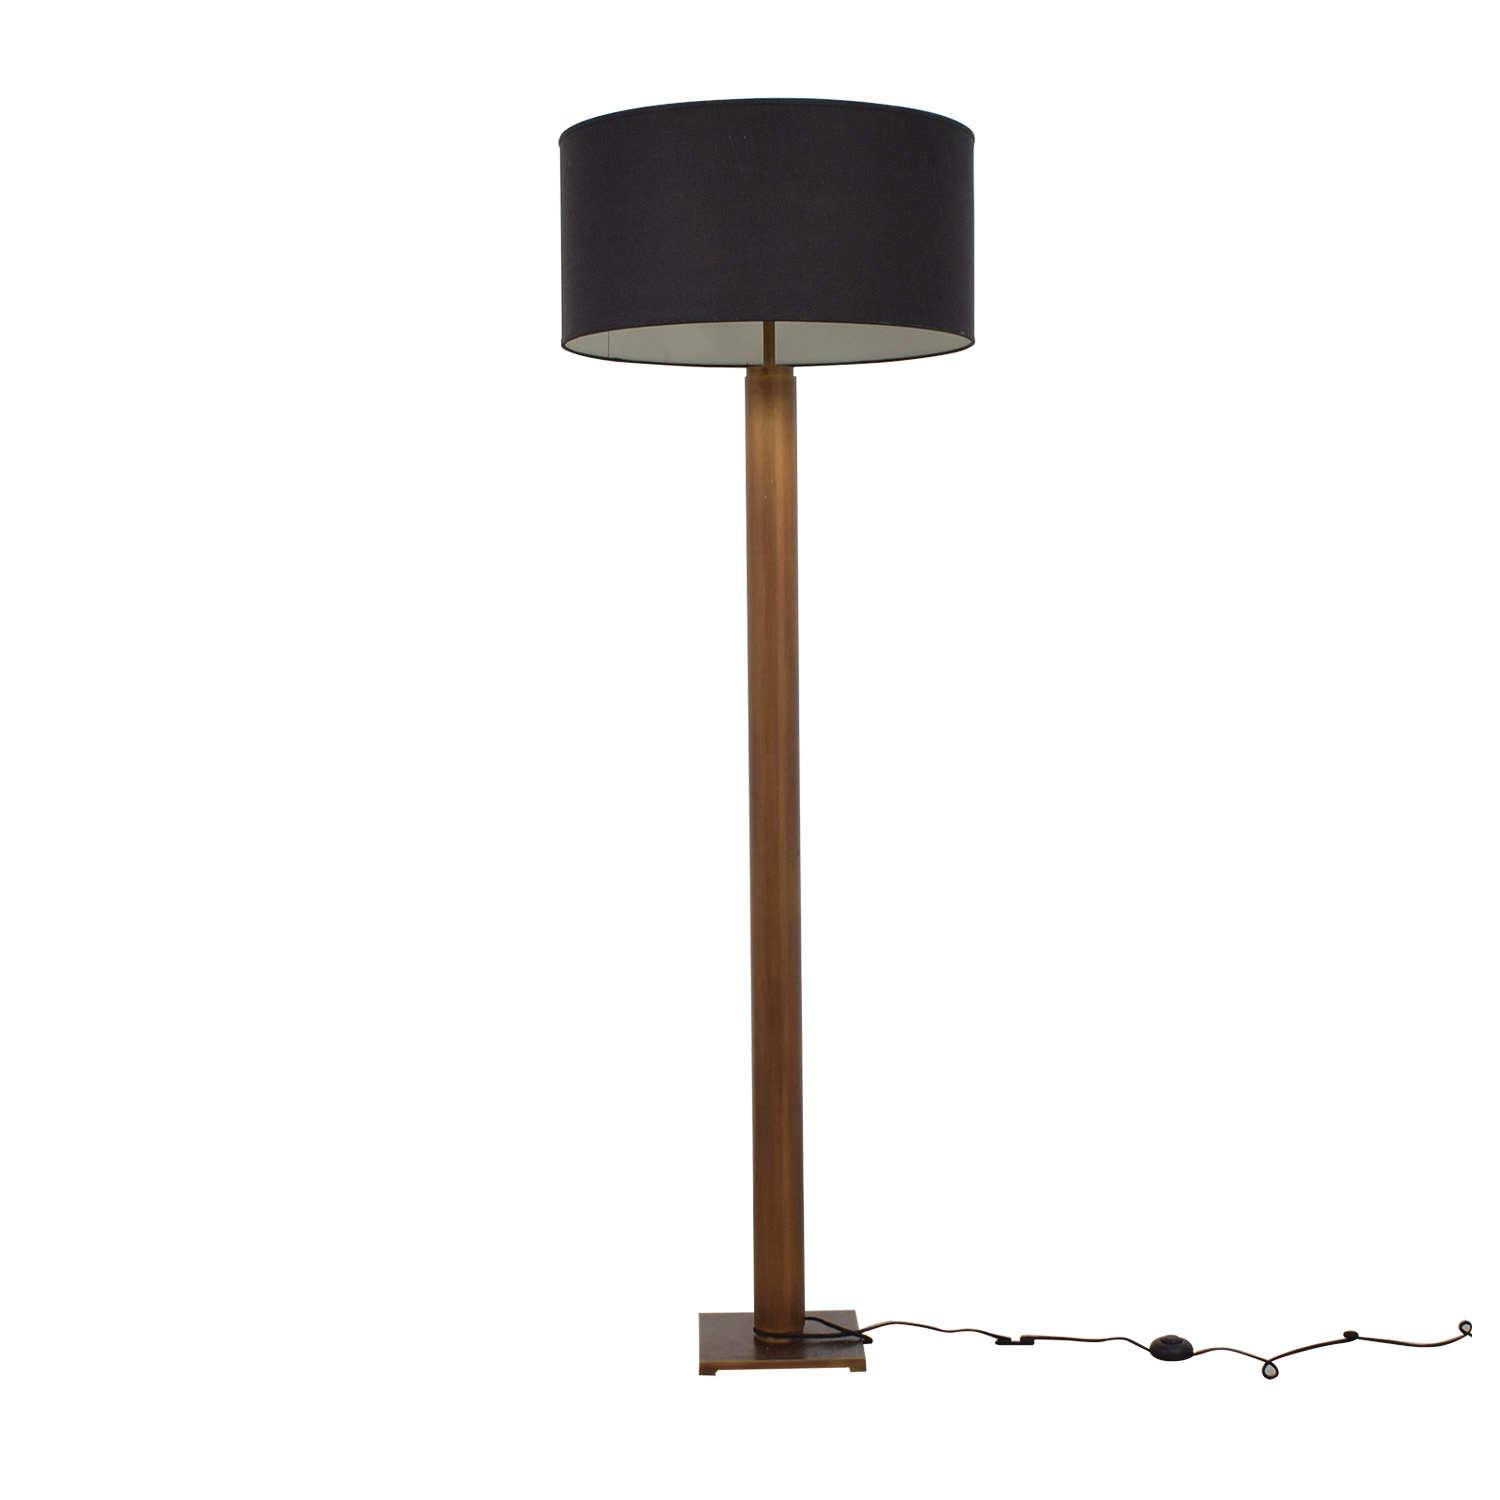 Splendid Restoration Hardware Floor Lamps With 62 Off intended for sizing 1500 X 1500